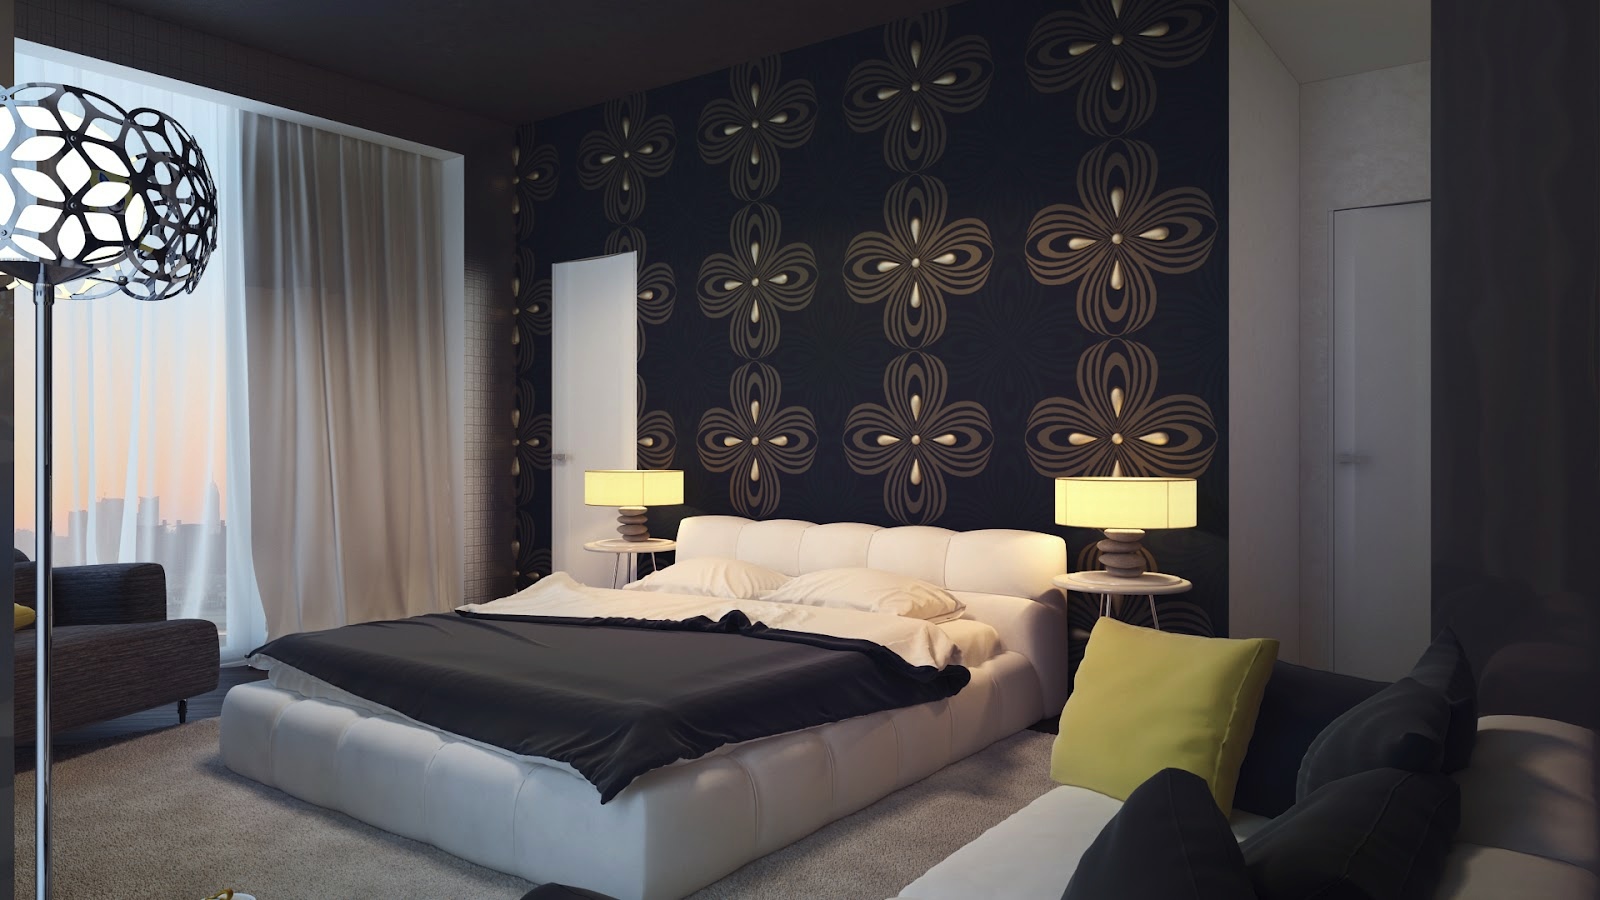 Bedroom Feature Walls On With Wallpaper